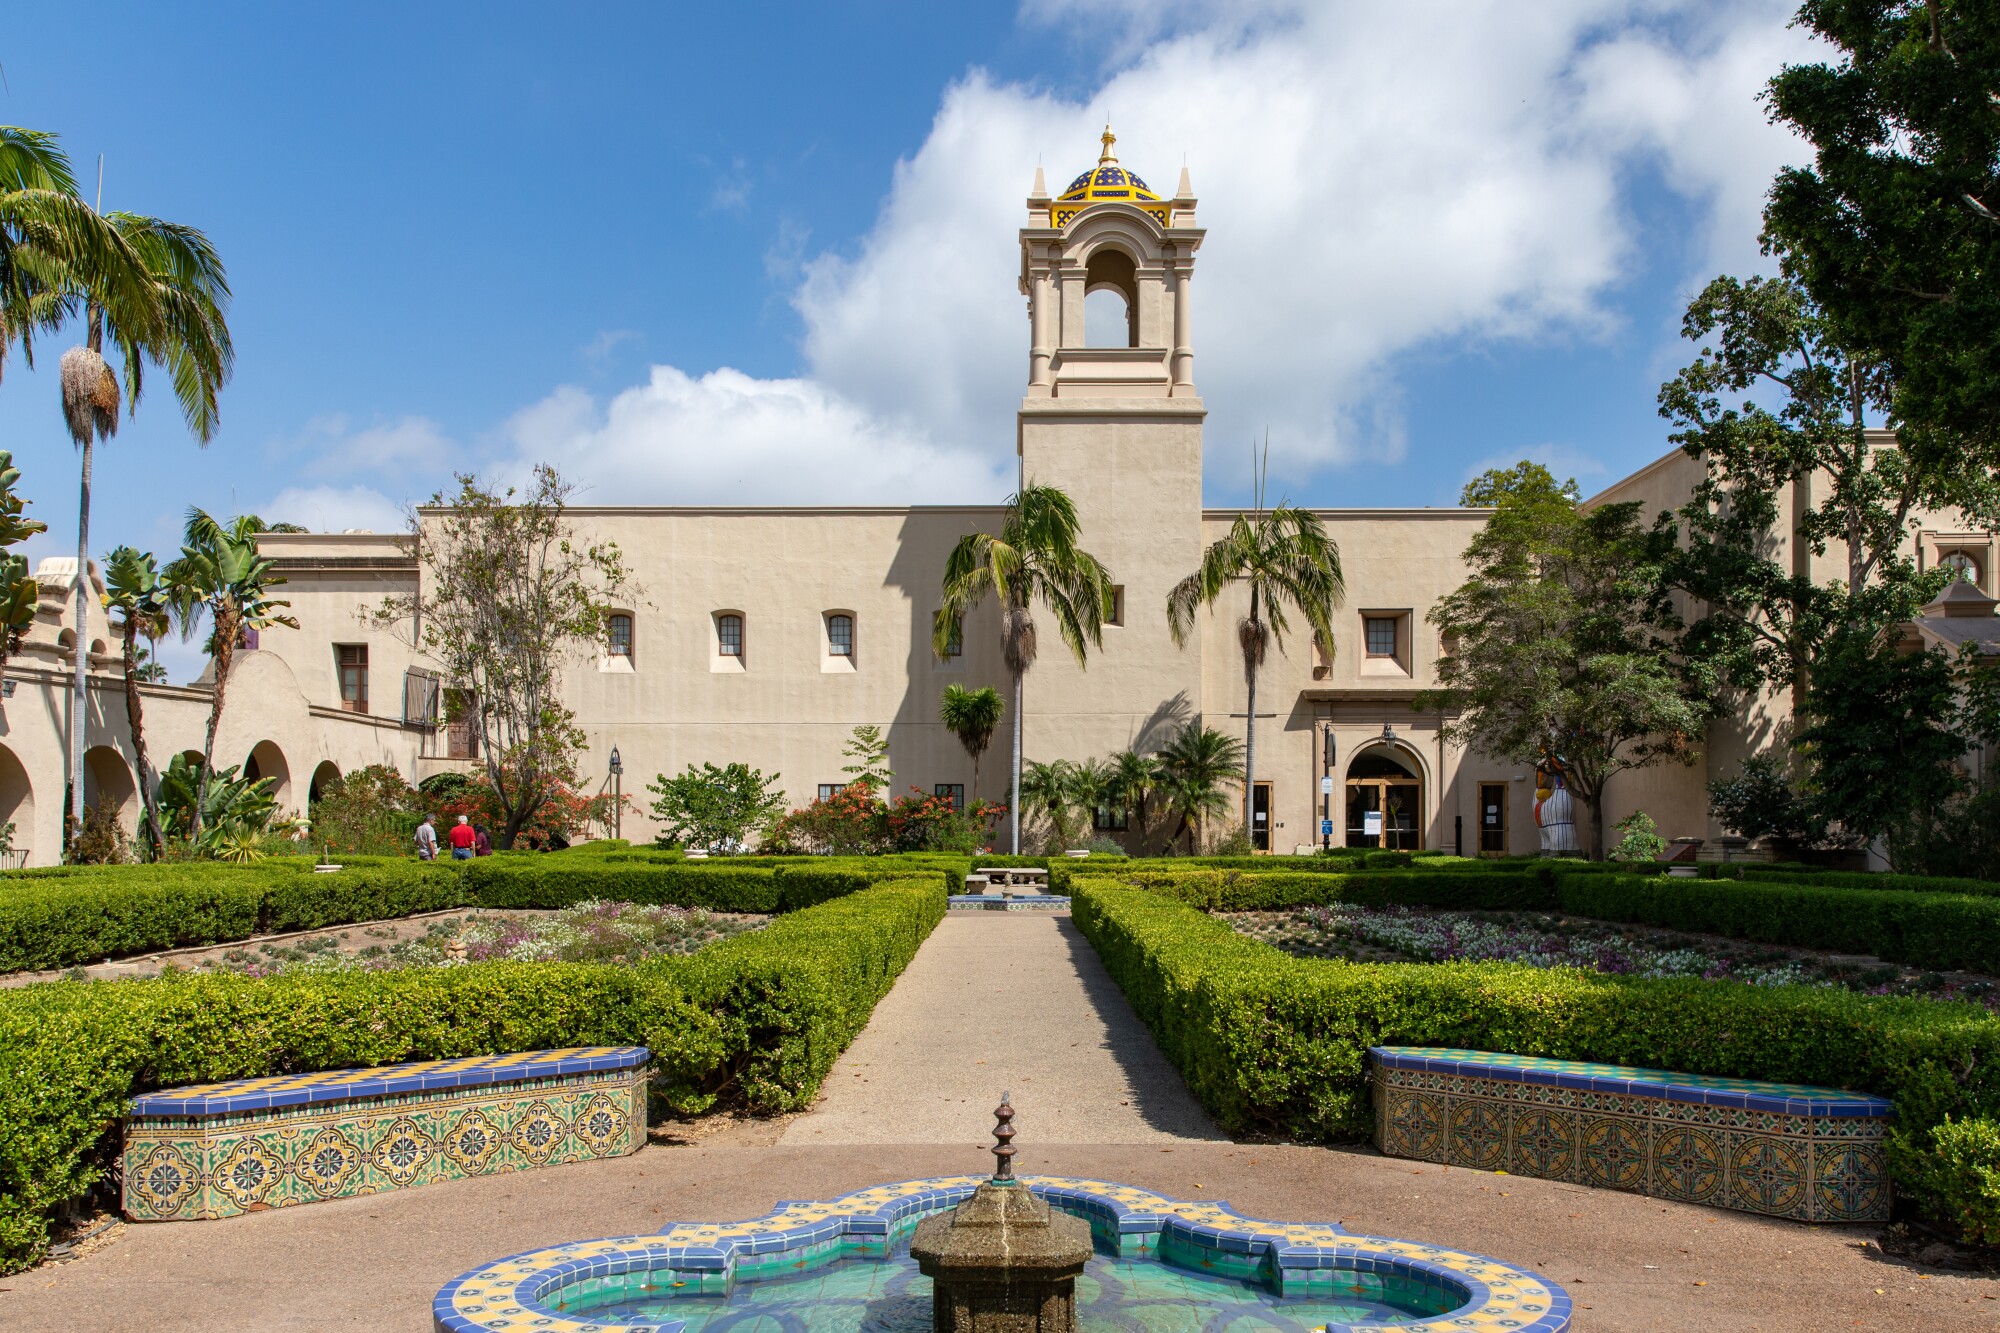 A fountain and a European-style garden can be seen before a multi-story Spanish-style building with a bell tower